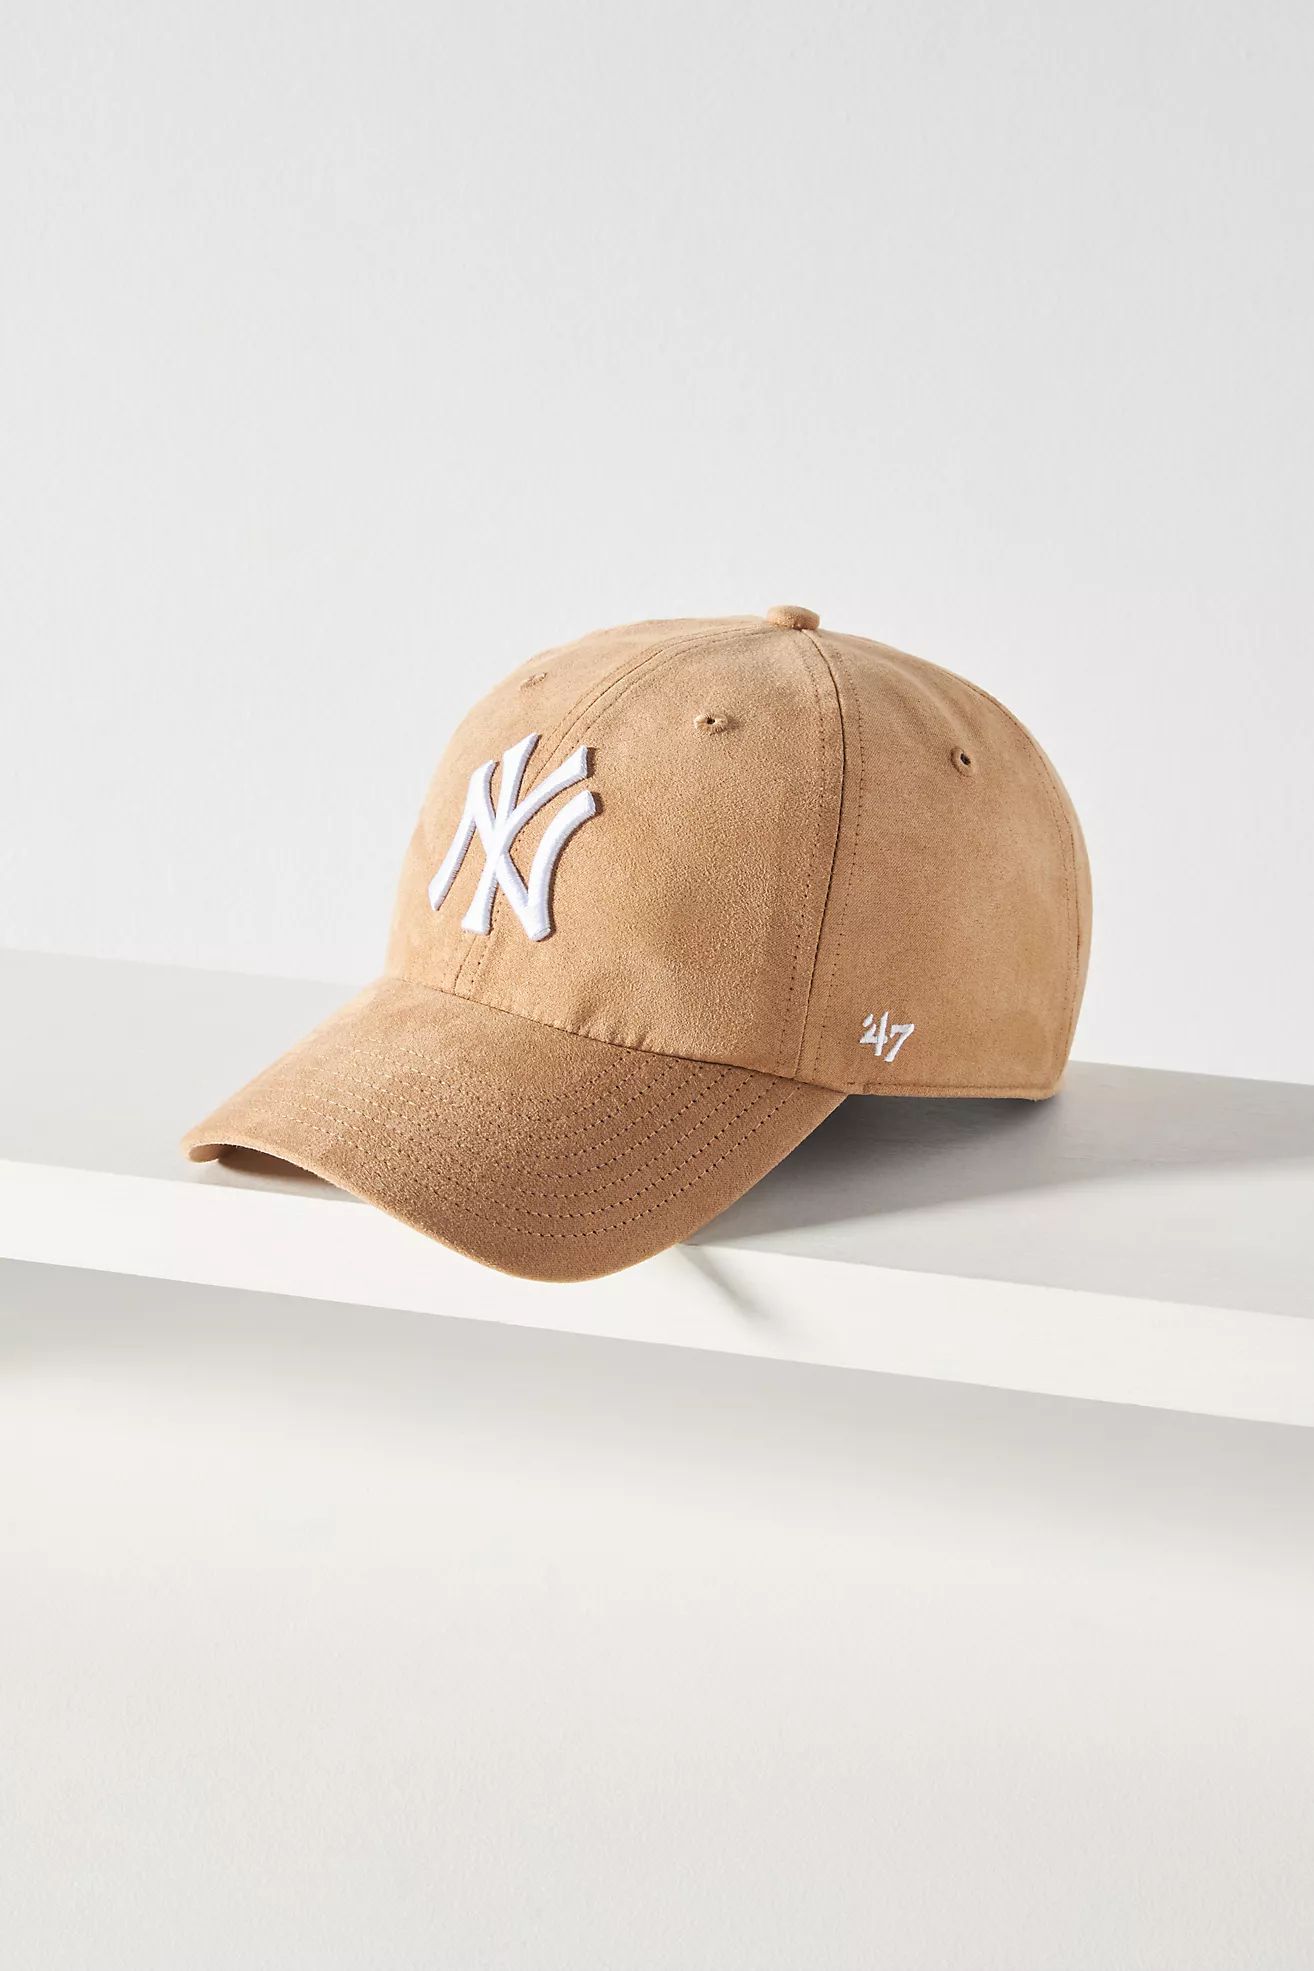 '47 Suede NY Baseball Cap | Anthropologie (US)